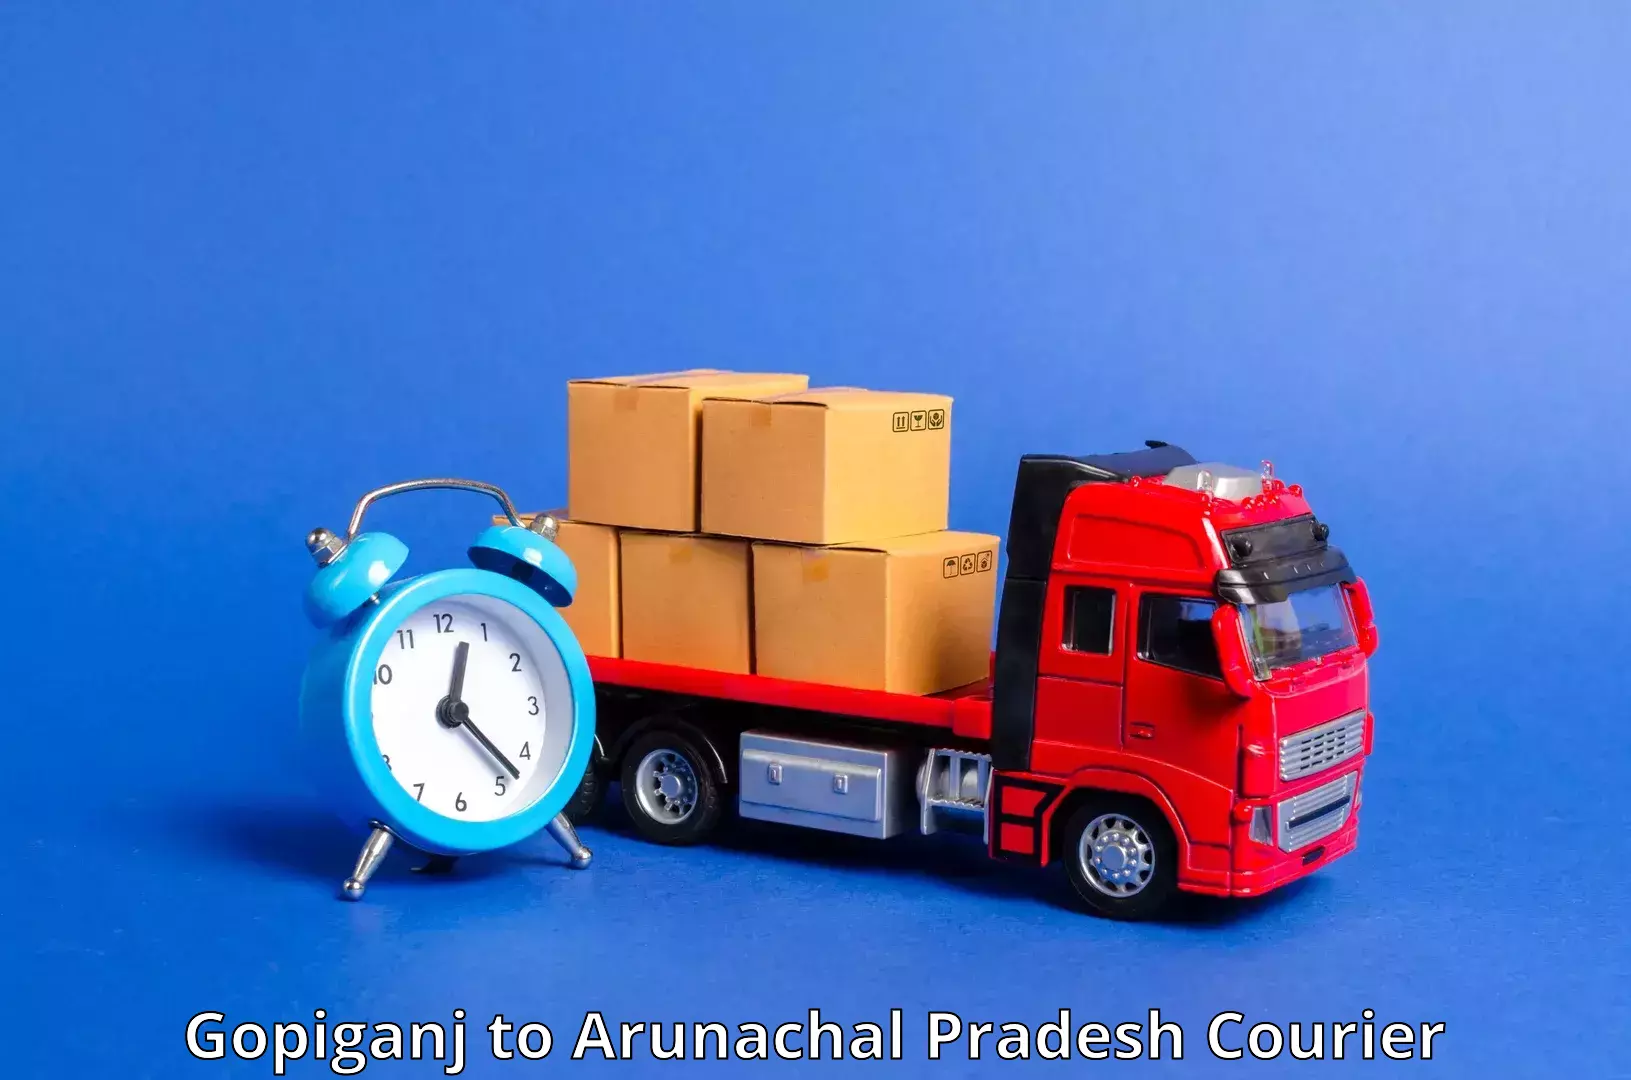 Large-scale shipping solutions Gopiganj to Dirang